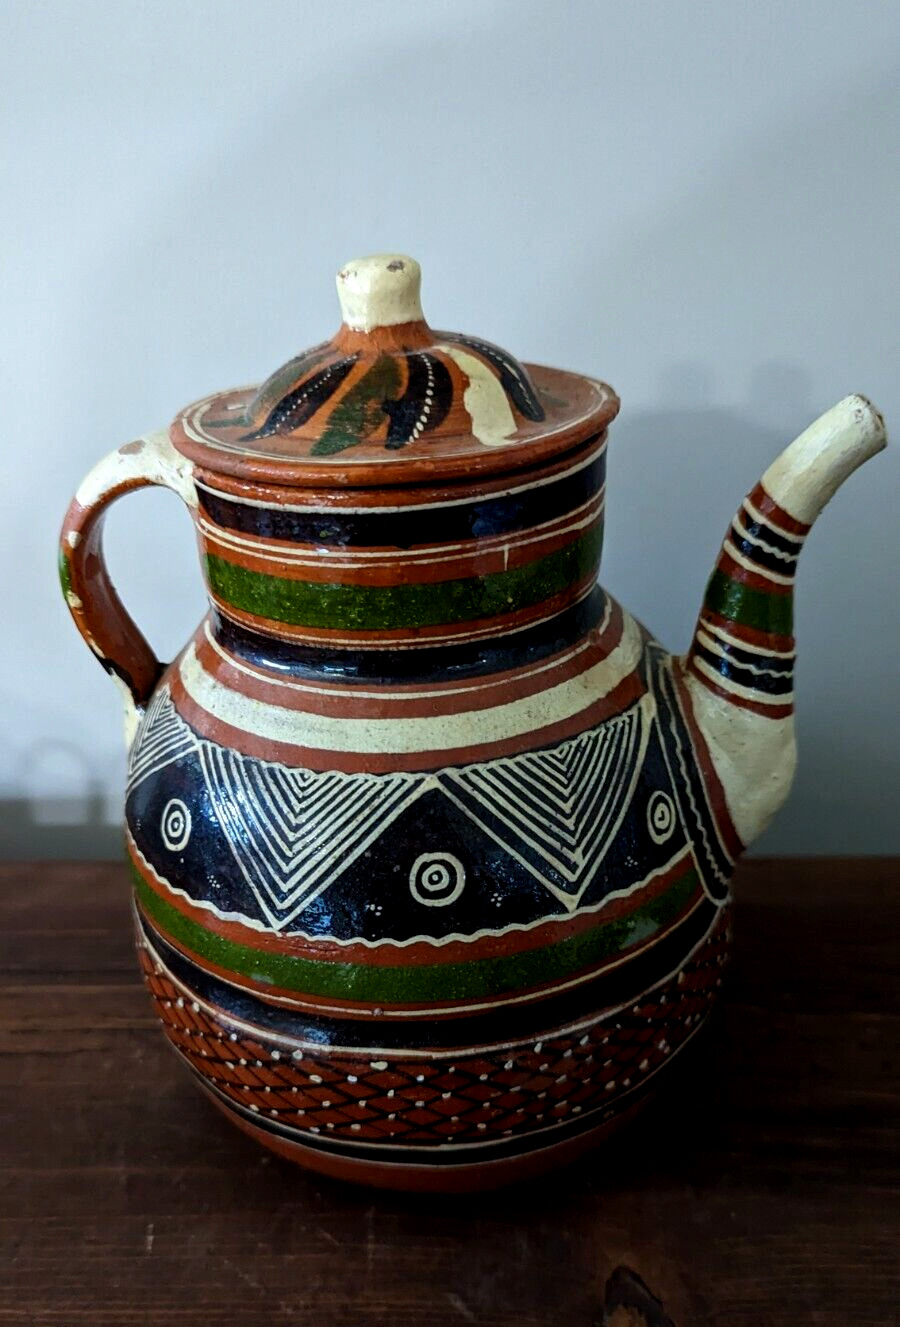 VTG TEAPOT Tlaquepaque, Jalisco MEXICO TRADITIONAL RED WARE POTTERY HAND PAINTED